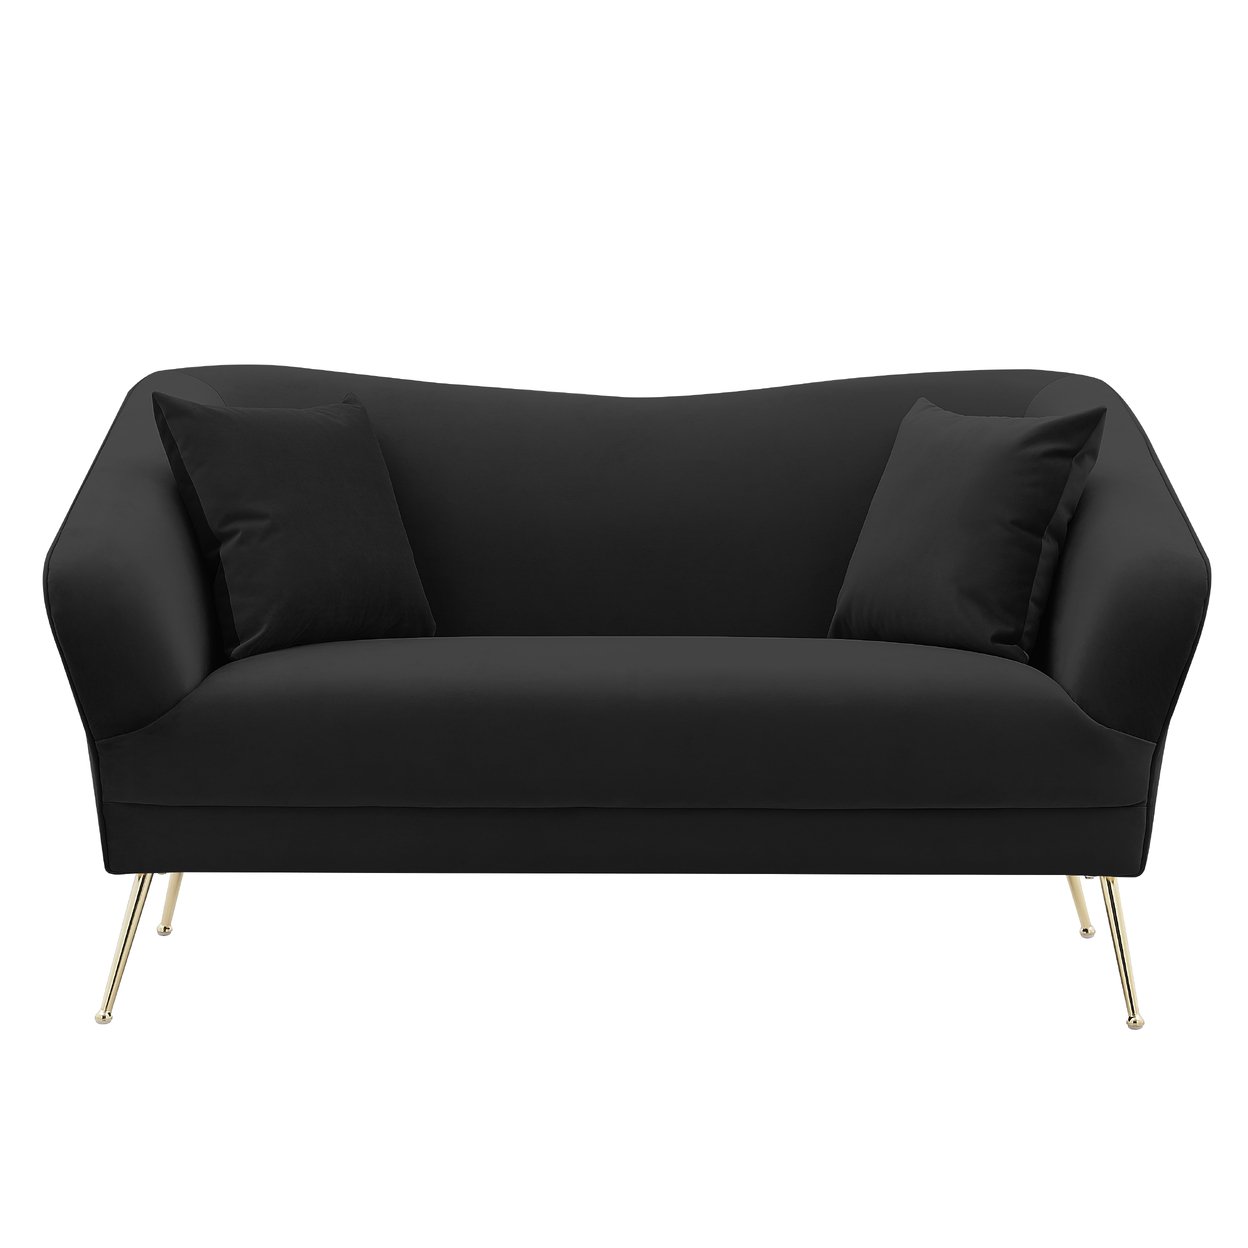 Iconic Home Ember Loveseat Velvet Upholstered Tight Seat Back Design Flared Gold Tone Metal Legs With 2 Decorative Pillows - Black